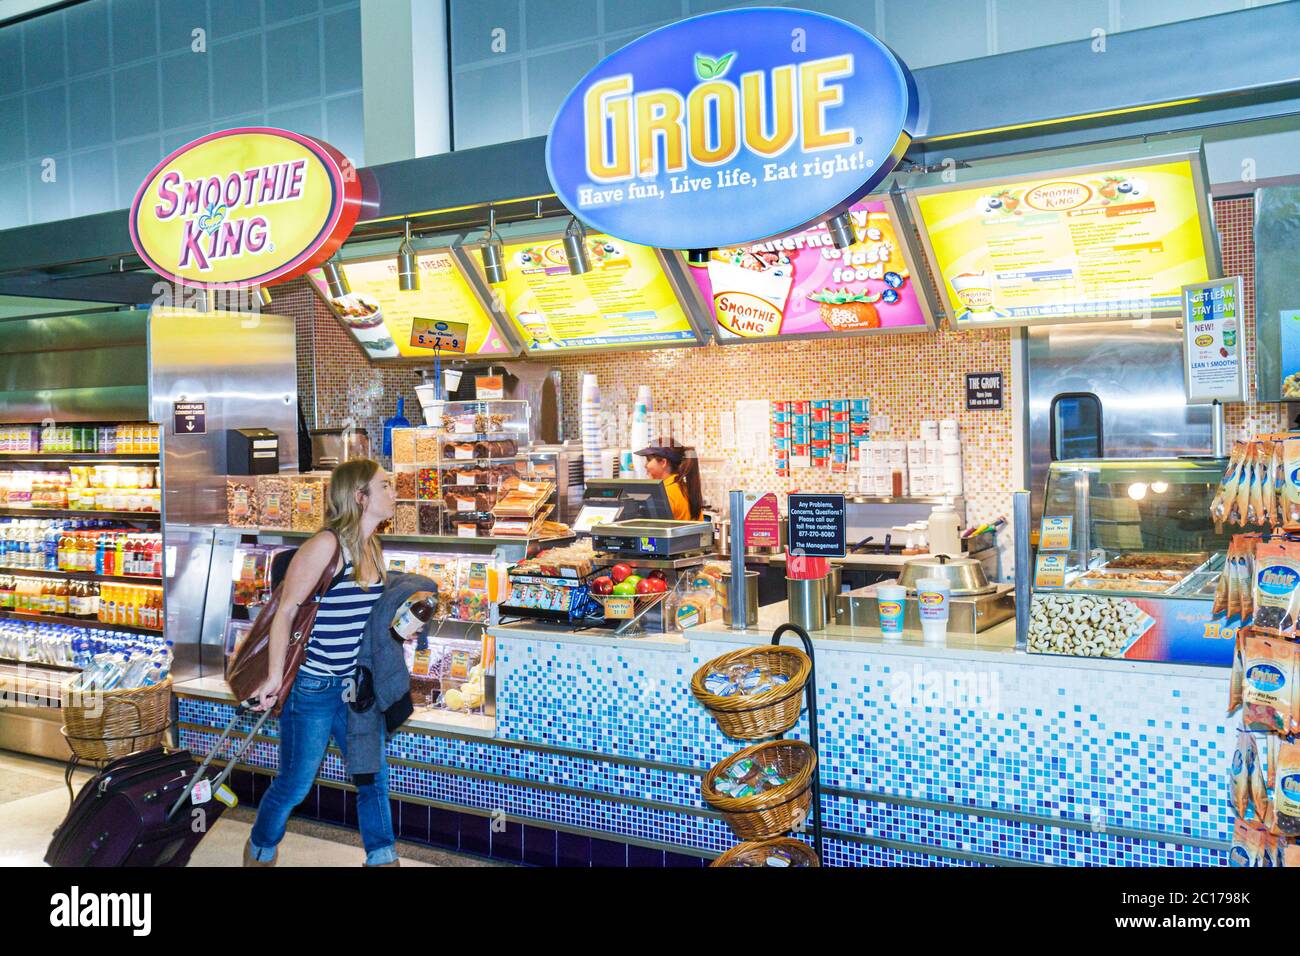 New Orleans Louisiana,Louis Armstrong New Orleans International Airport,MSY,terminal,fast food restaurant,restaurants,food,dine,eat out,Grove,Smoothie Stock Photo